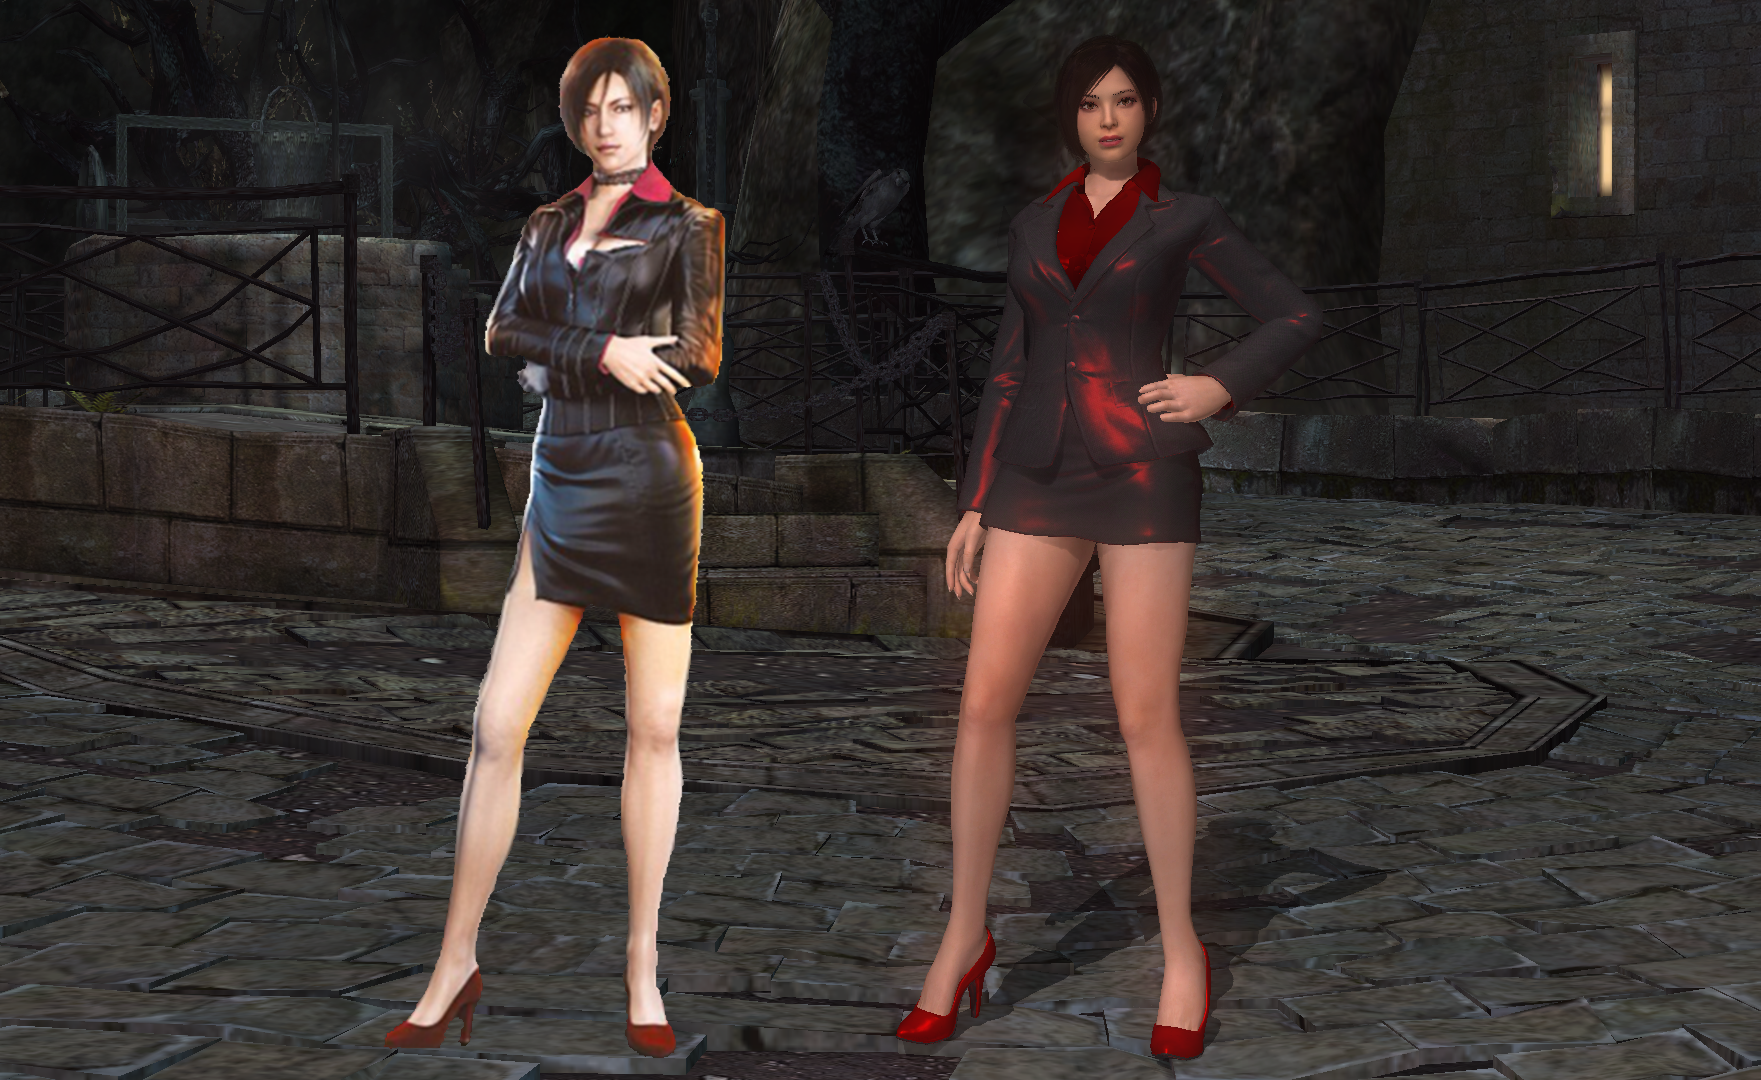 Dead Or Alive 5 Mod: Ada Wong. by Venom-Rules-all on DeviantArt